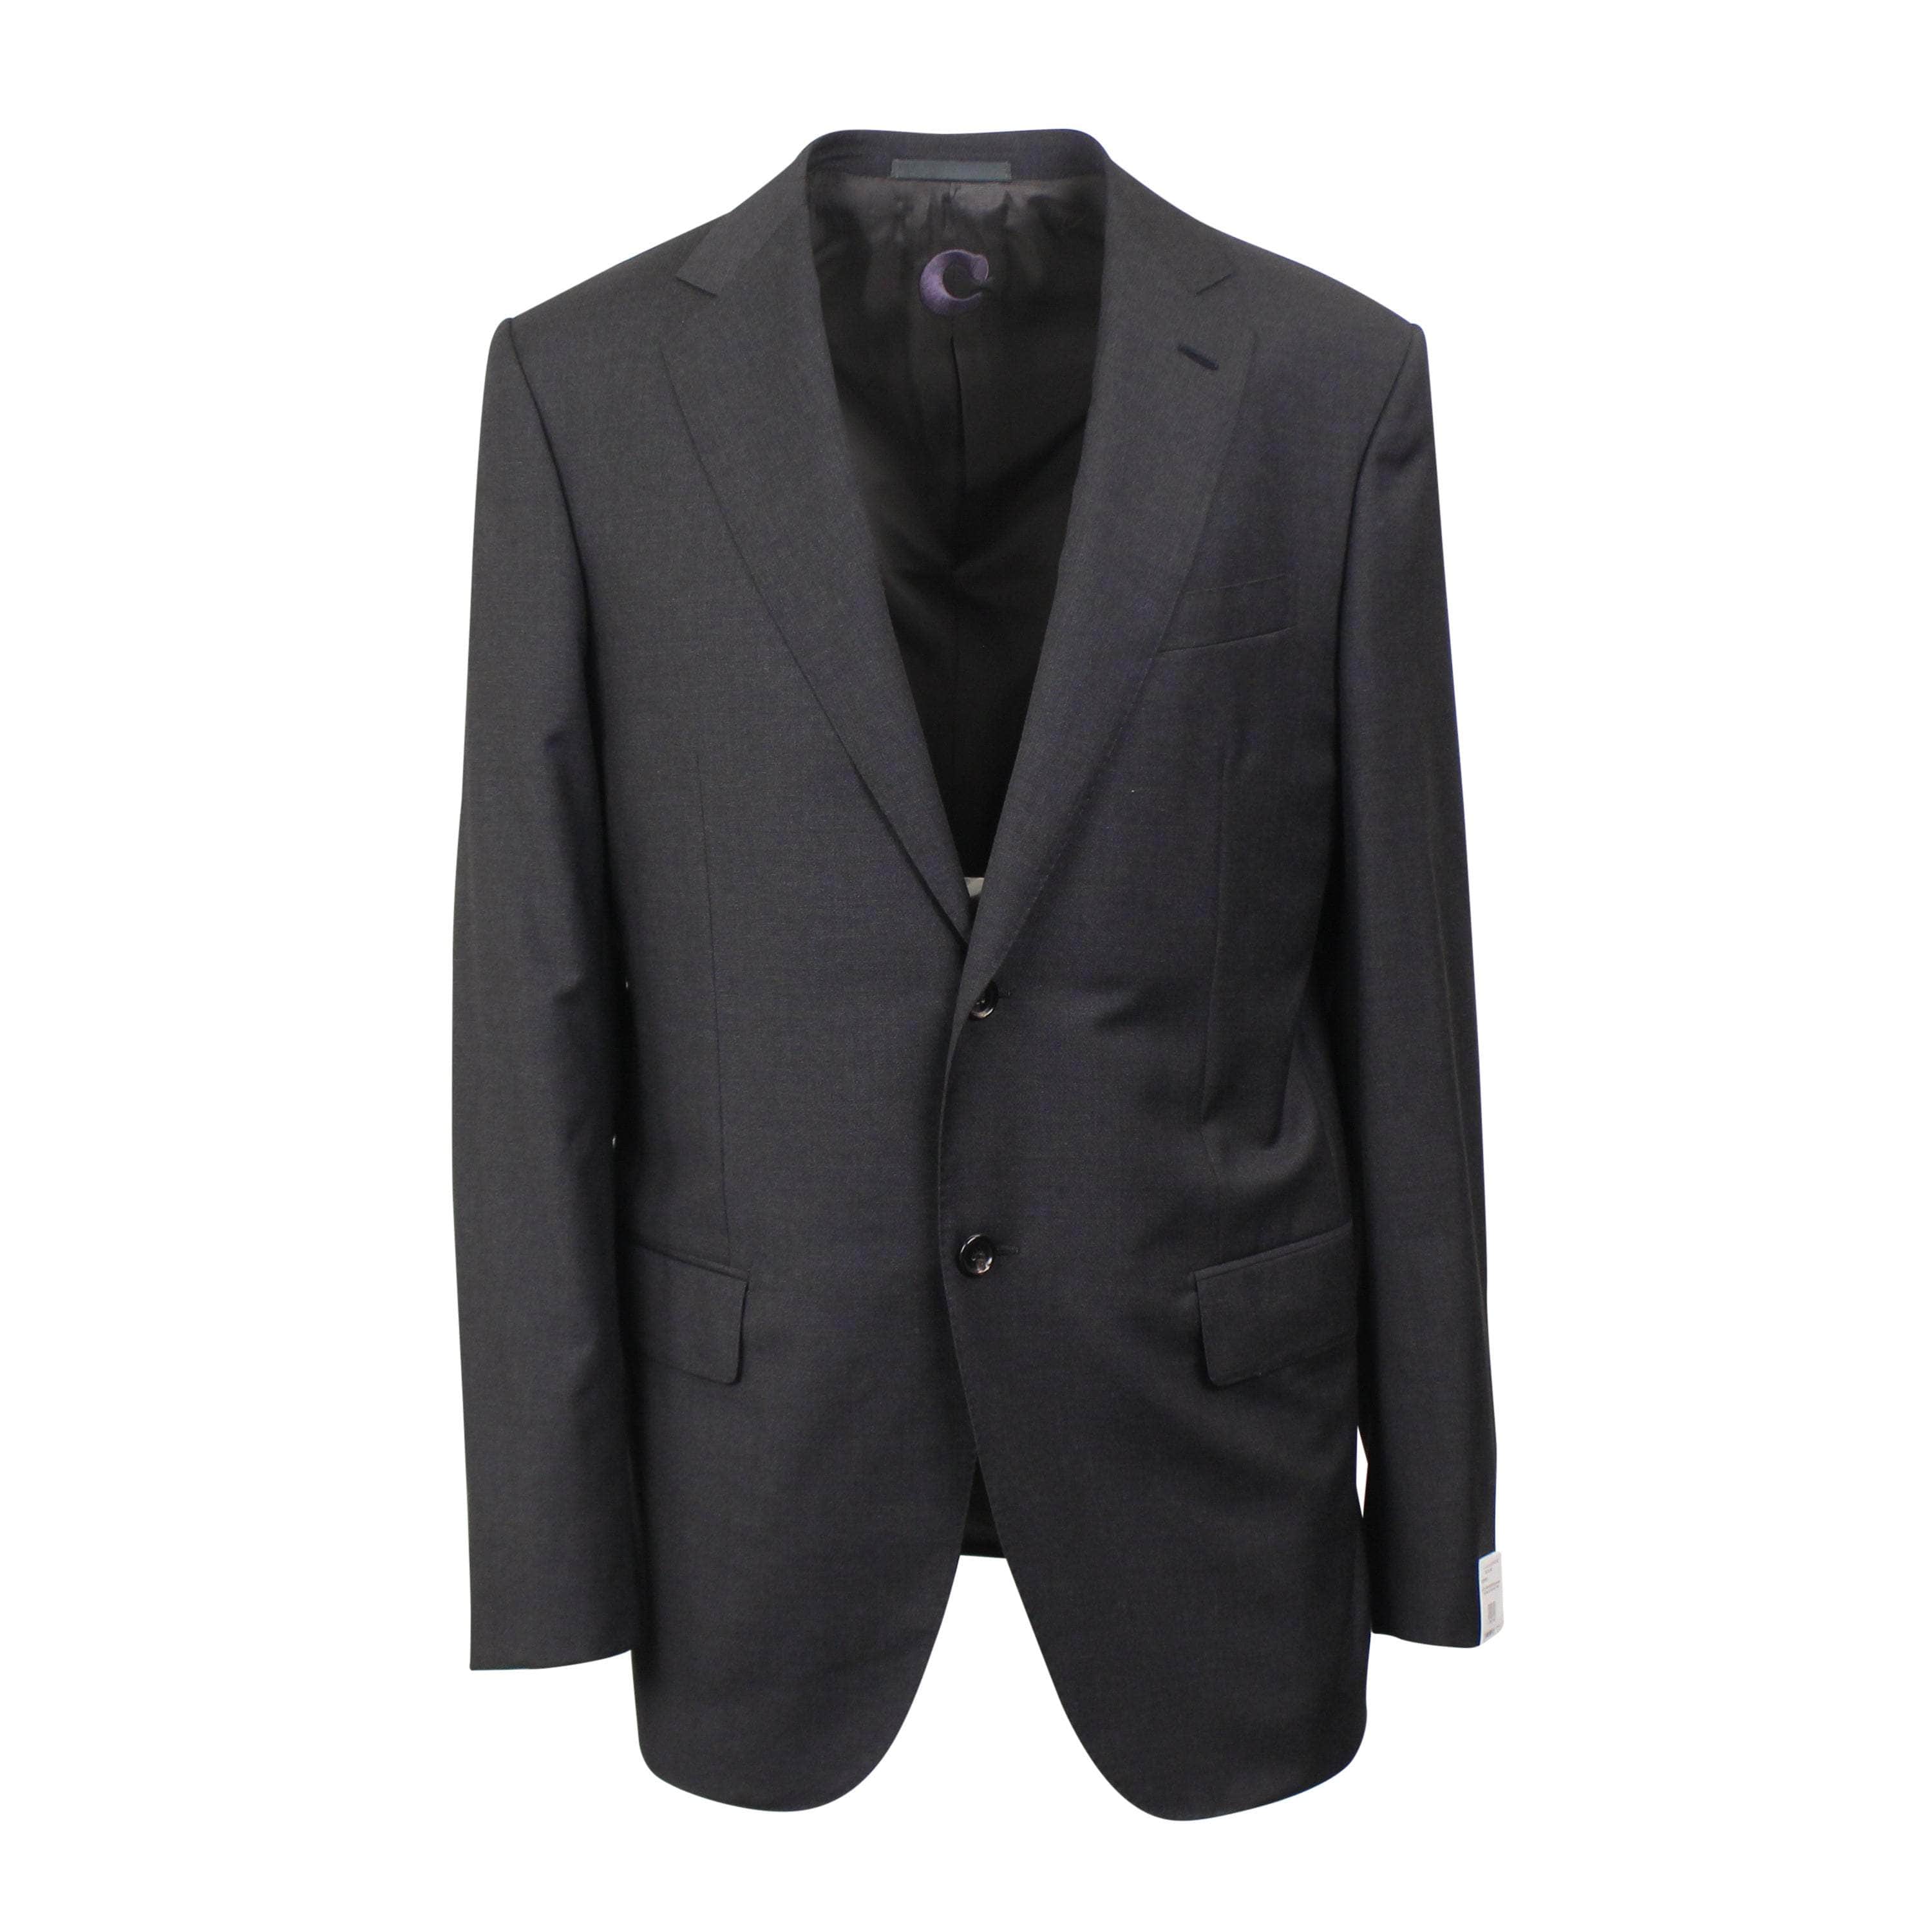 Caruso 500-750, caruso, channelenable-all, chicmi, couponcollection, main-clothing, shop375, size-50, Stadium Goods, stadiumgoods 50 Single Breasted Wool Black & Grey Suit CRS-XTPS-0158/50 CRS-XTPS-0158/50